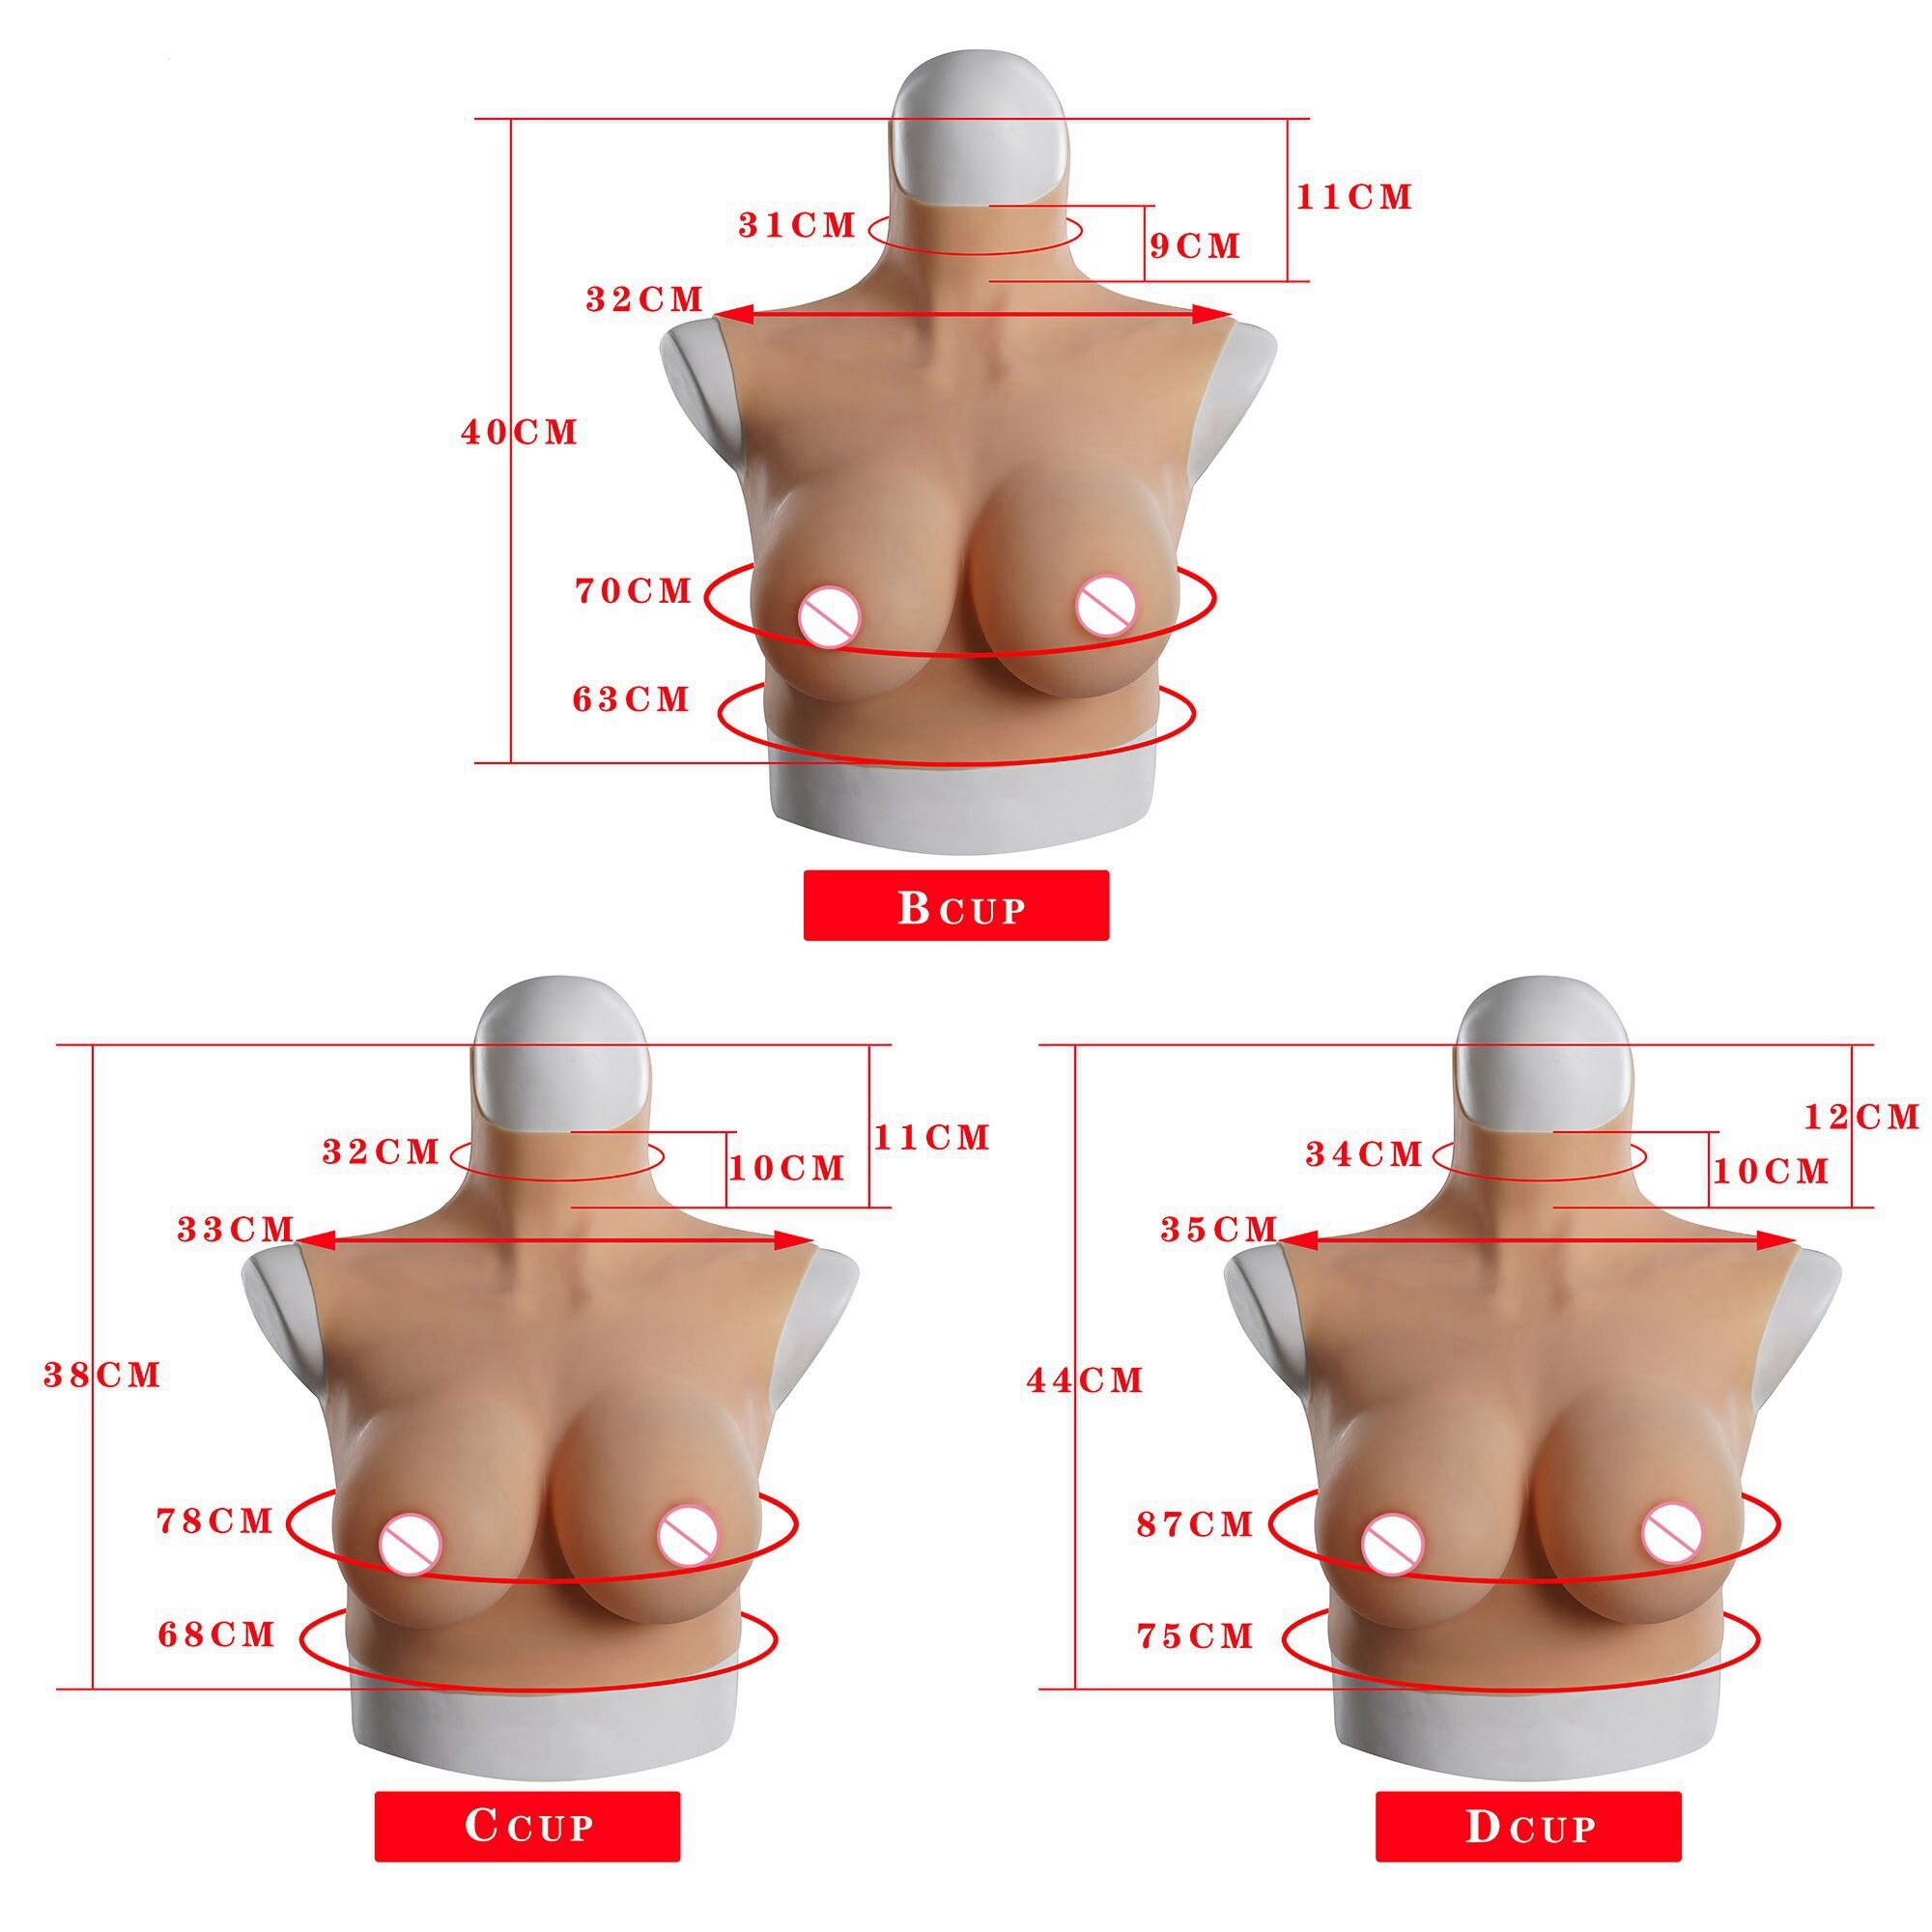 2G Upgrade BCD High Collar Neck Fake Artificial Boob Realistic Silicone Breast Forms Crossdresser Shemale Transgender Drag Queen